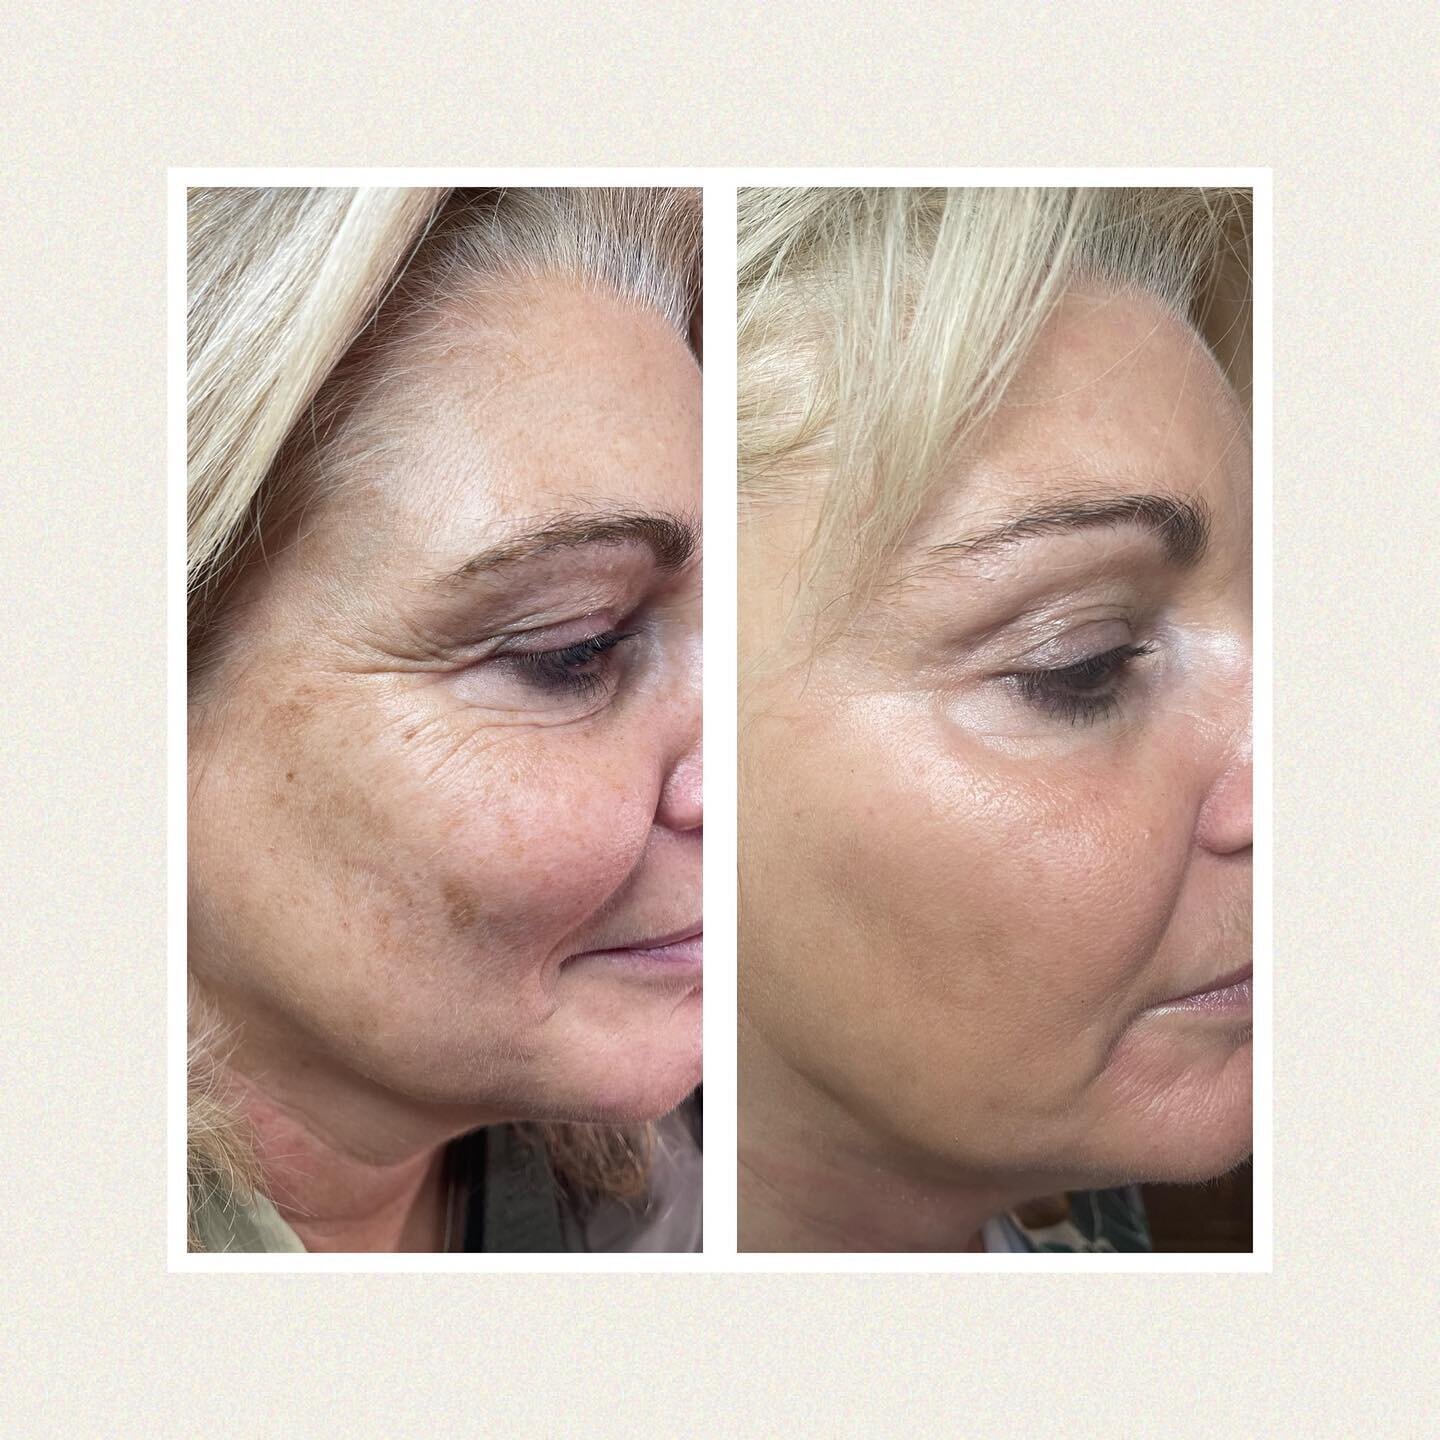 An amazing result using @obagimedical NuDerm system to treat pigmentation and signs of ageing. 
Her skin is smoother, glowing and clear from pigmentation.
This took 14 weeks using prescription skincare at home with my guidance. 
Book a free consultat